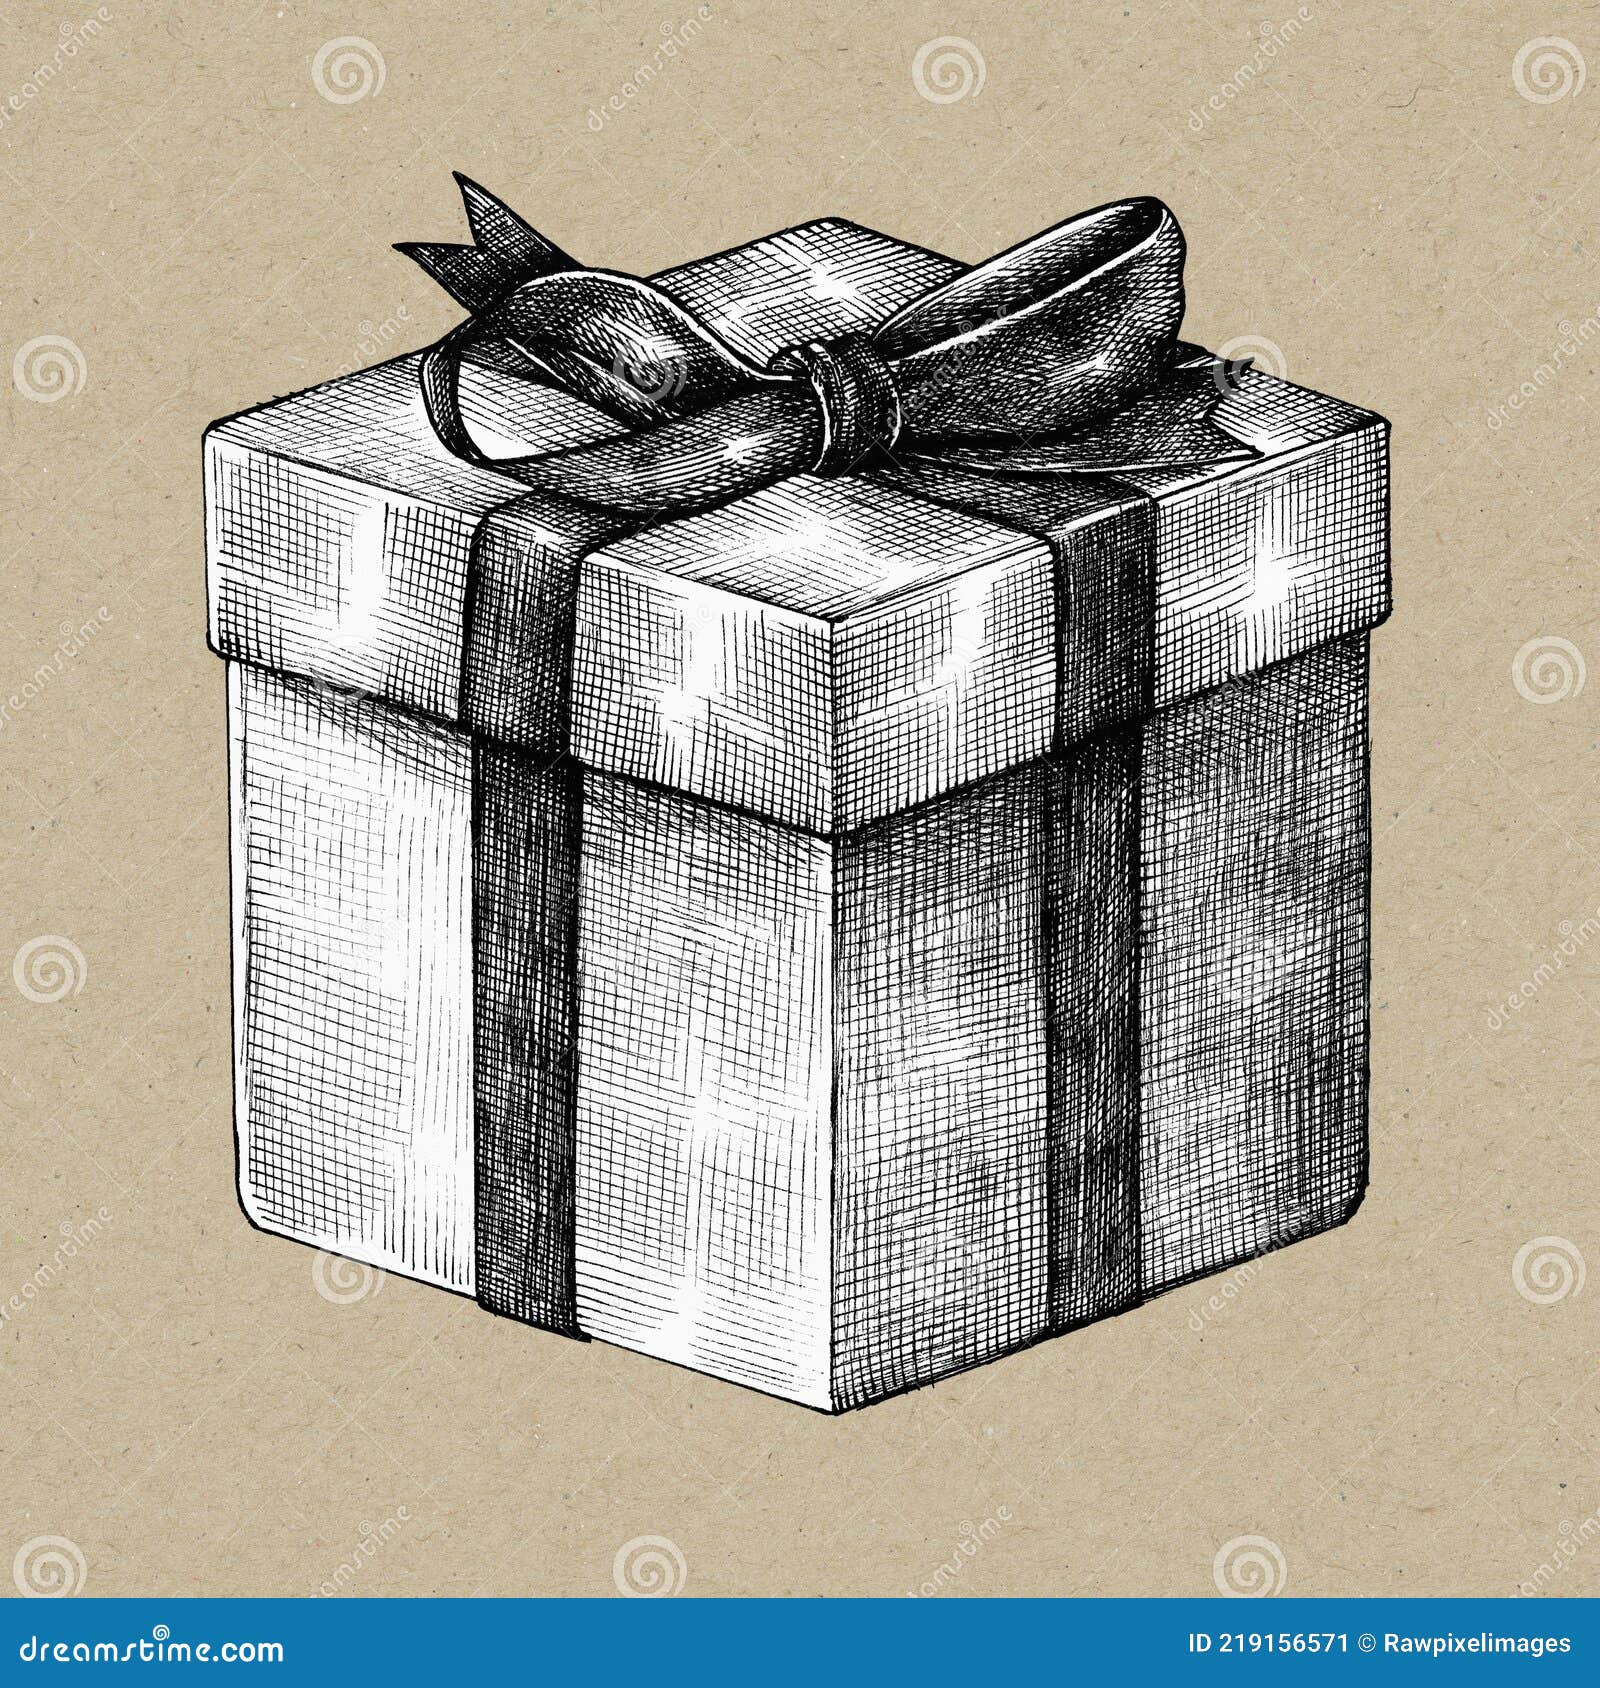 Share 126+ gift images drawing